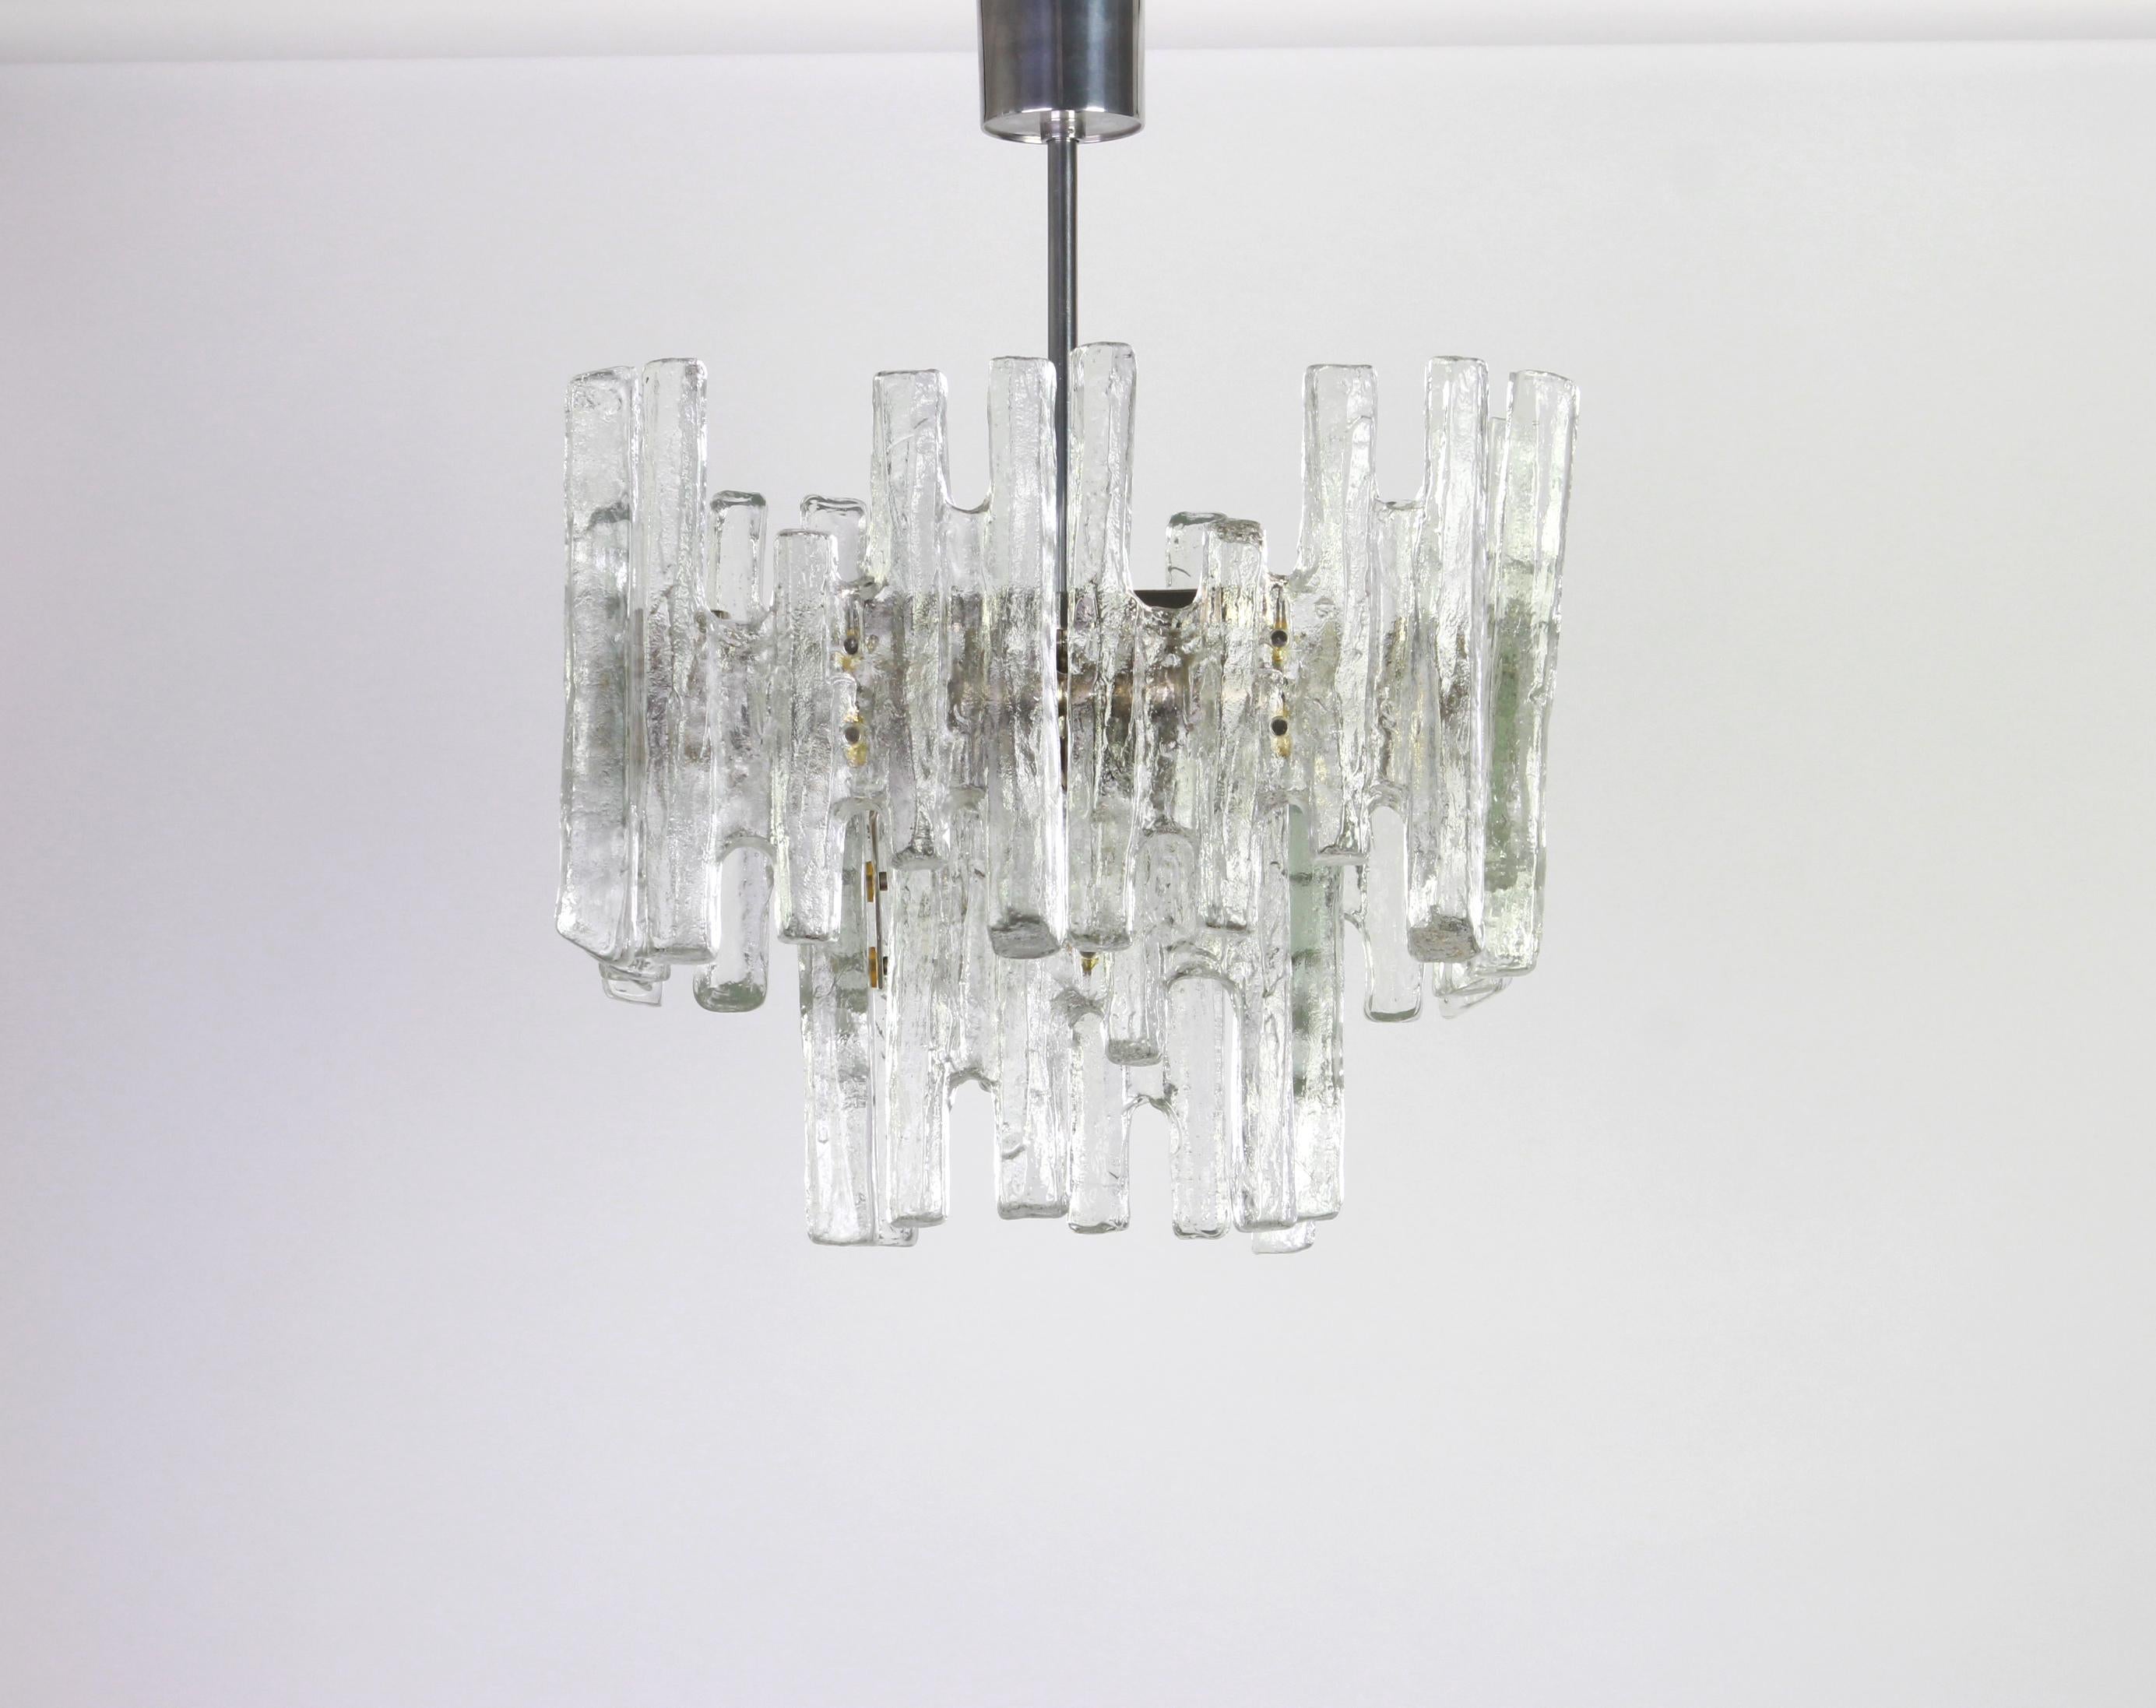 Stunning Murano glass chandelier by Kalmar, 1960s
Two tiers structure gathering 12 structured glasses, beautifully refracting the light very heavy quality.

High quality and in very good condition. Cleaned, well-wired and ready to use. 

The